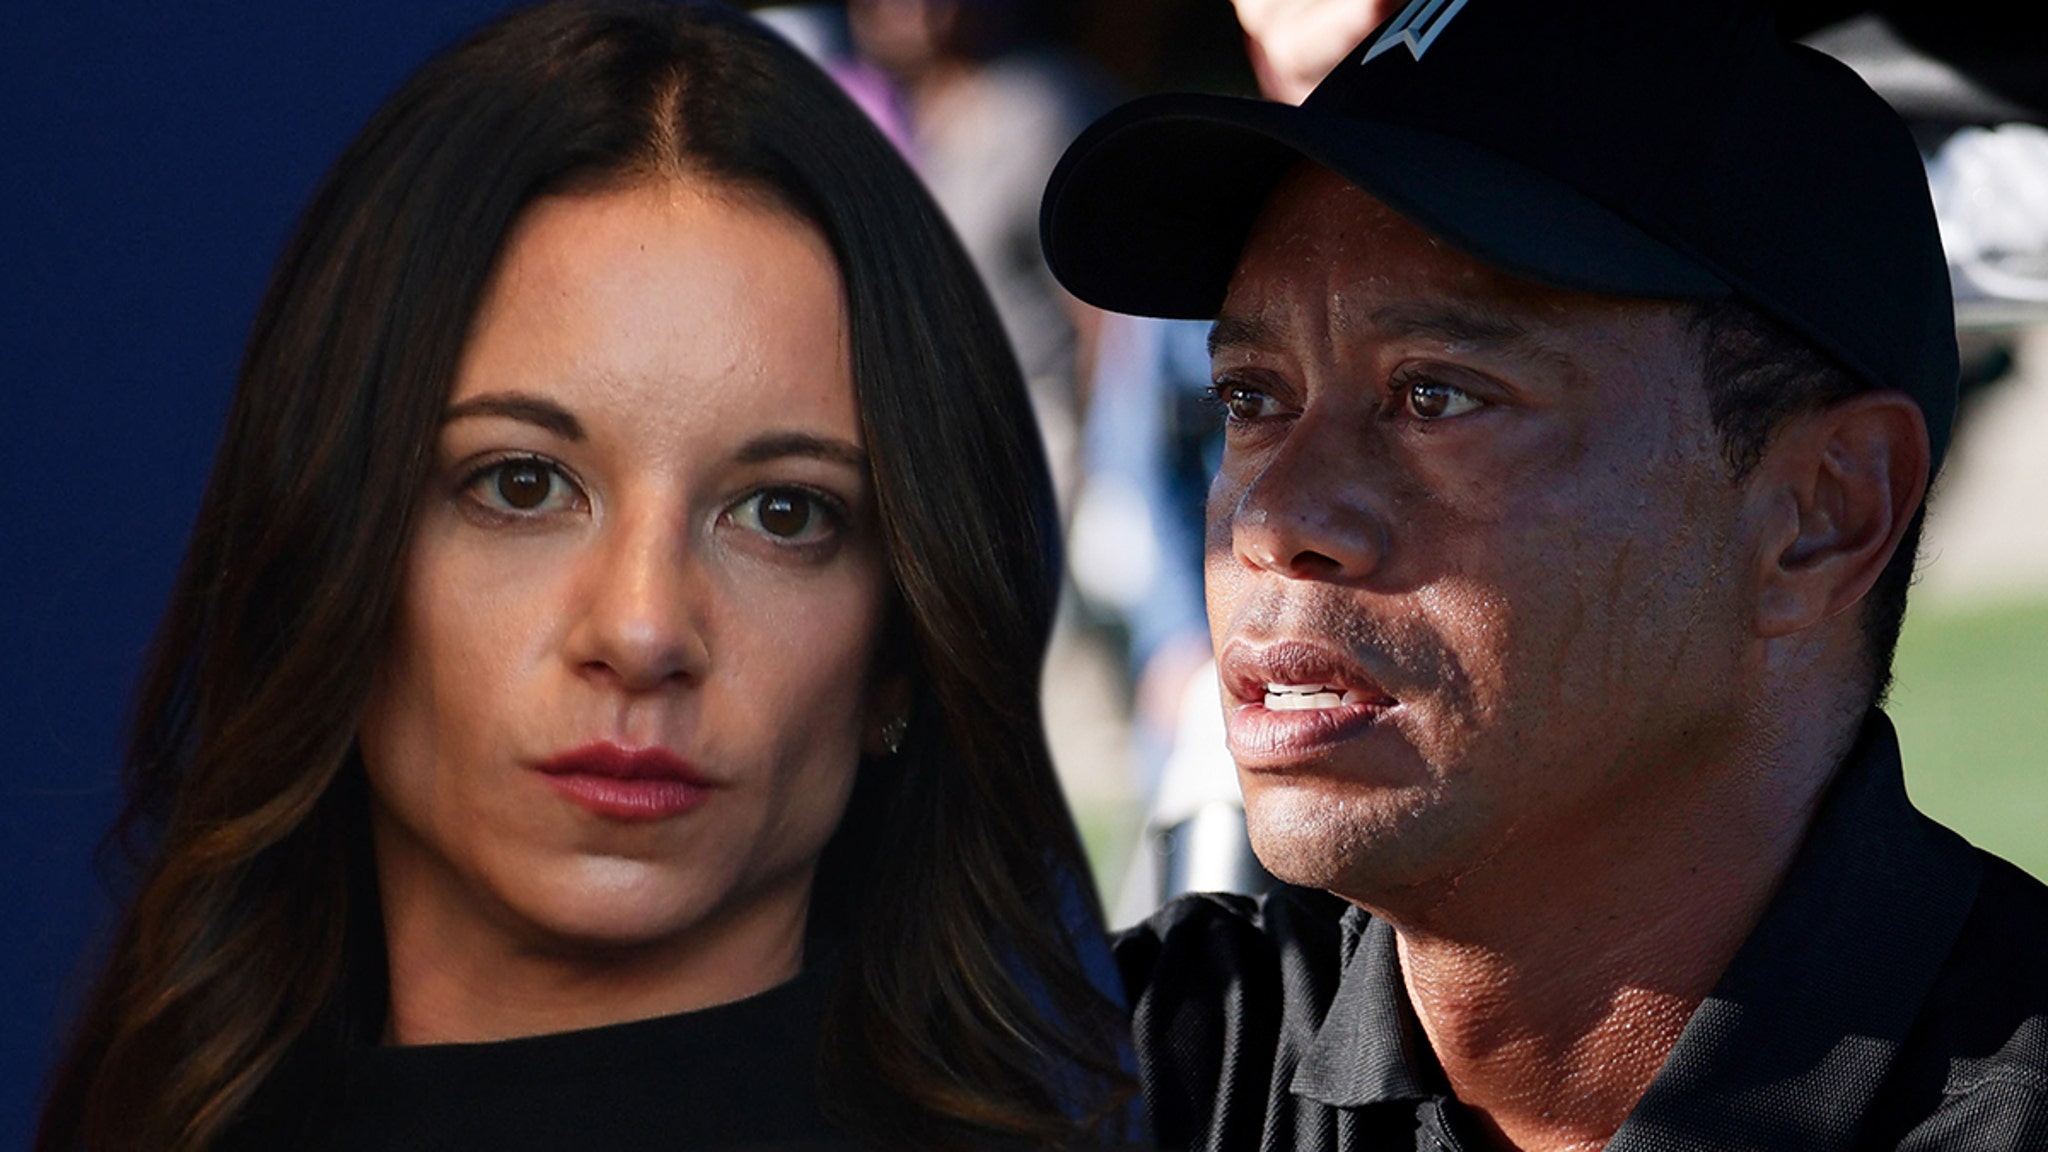 Tiger Woods' ex-girlfriend wants NDA overturned, cites sexual assault and harassment law